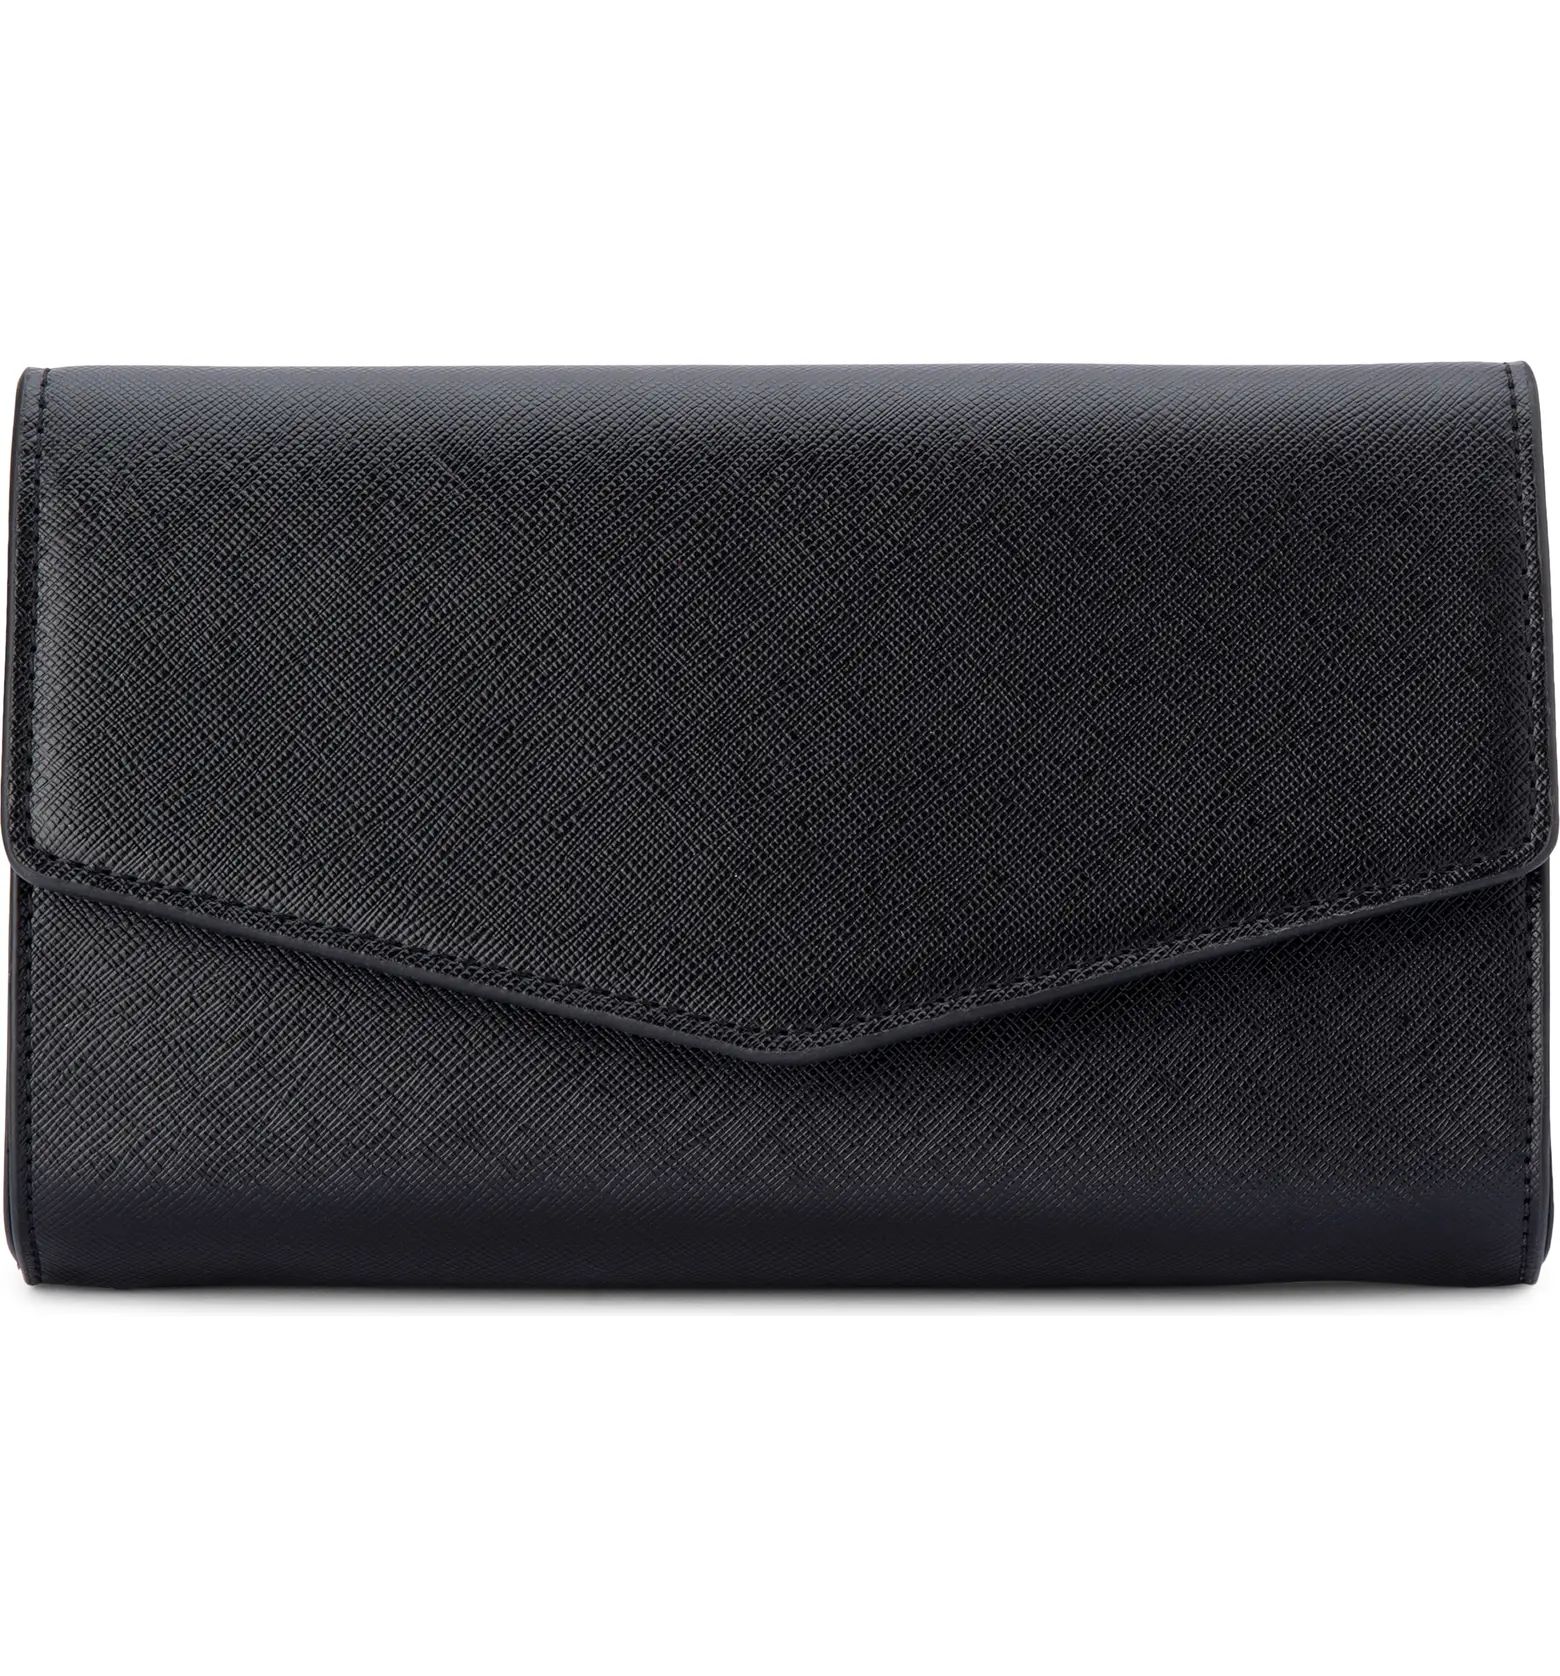 Nic Faux Leather Clutch | Nordstrom